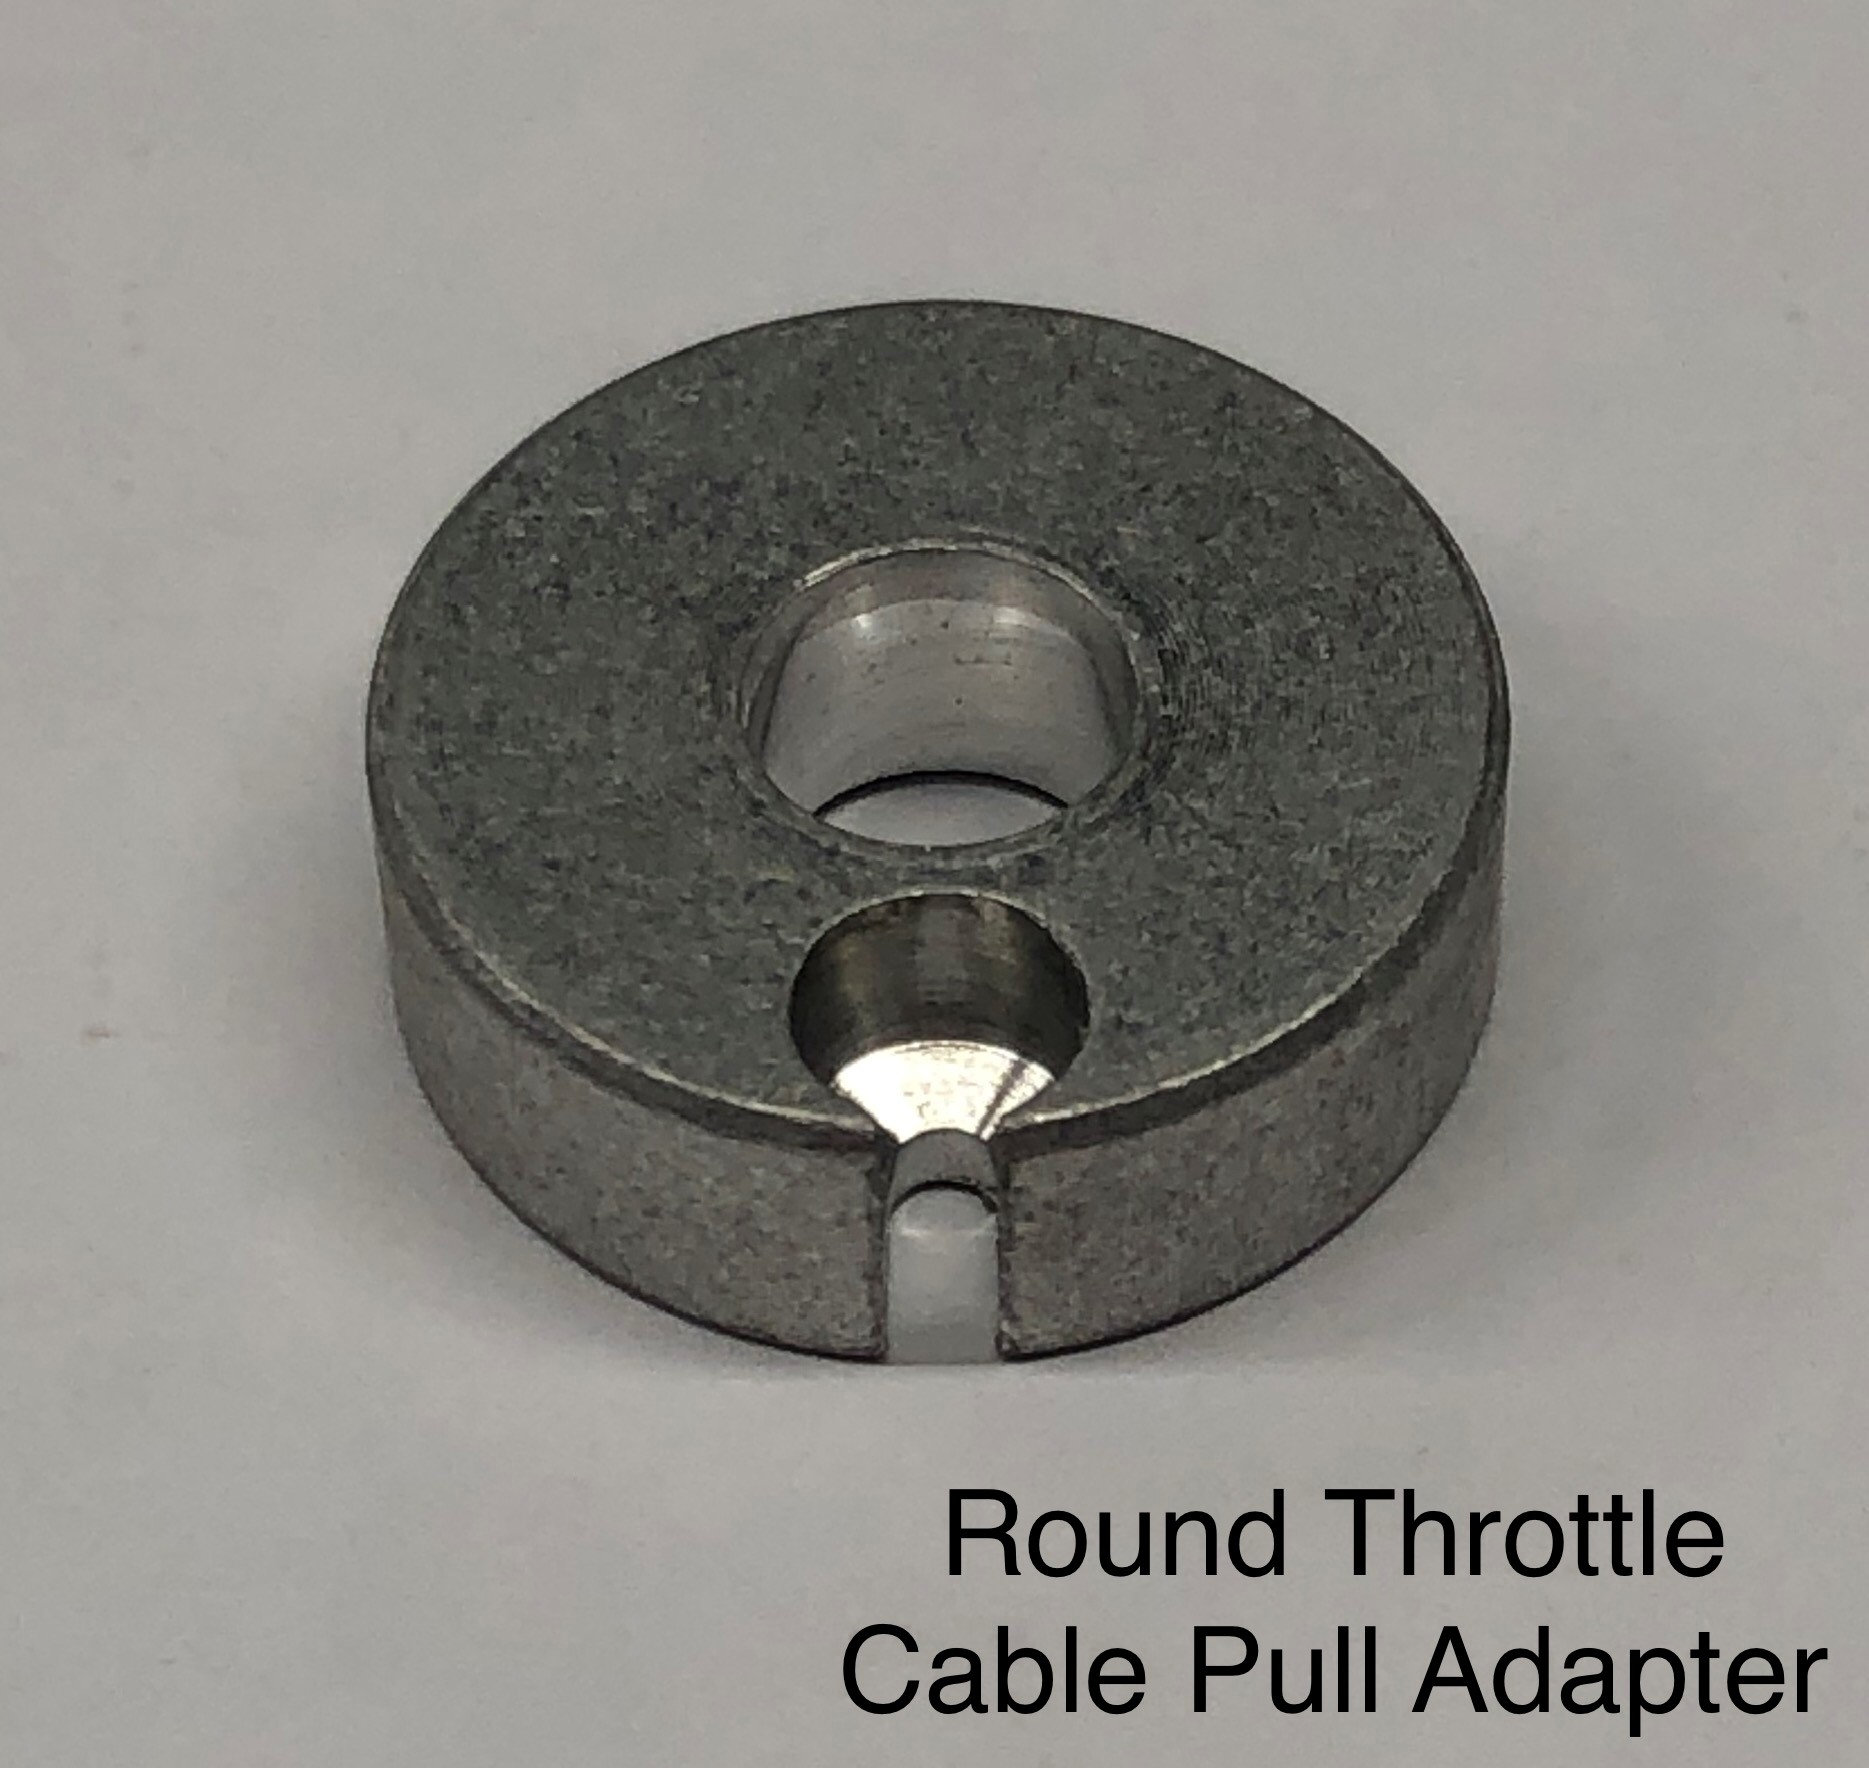 Round Throttle Cable Pull Adapter